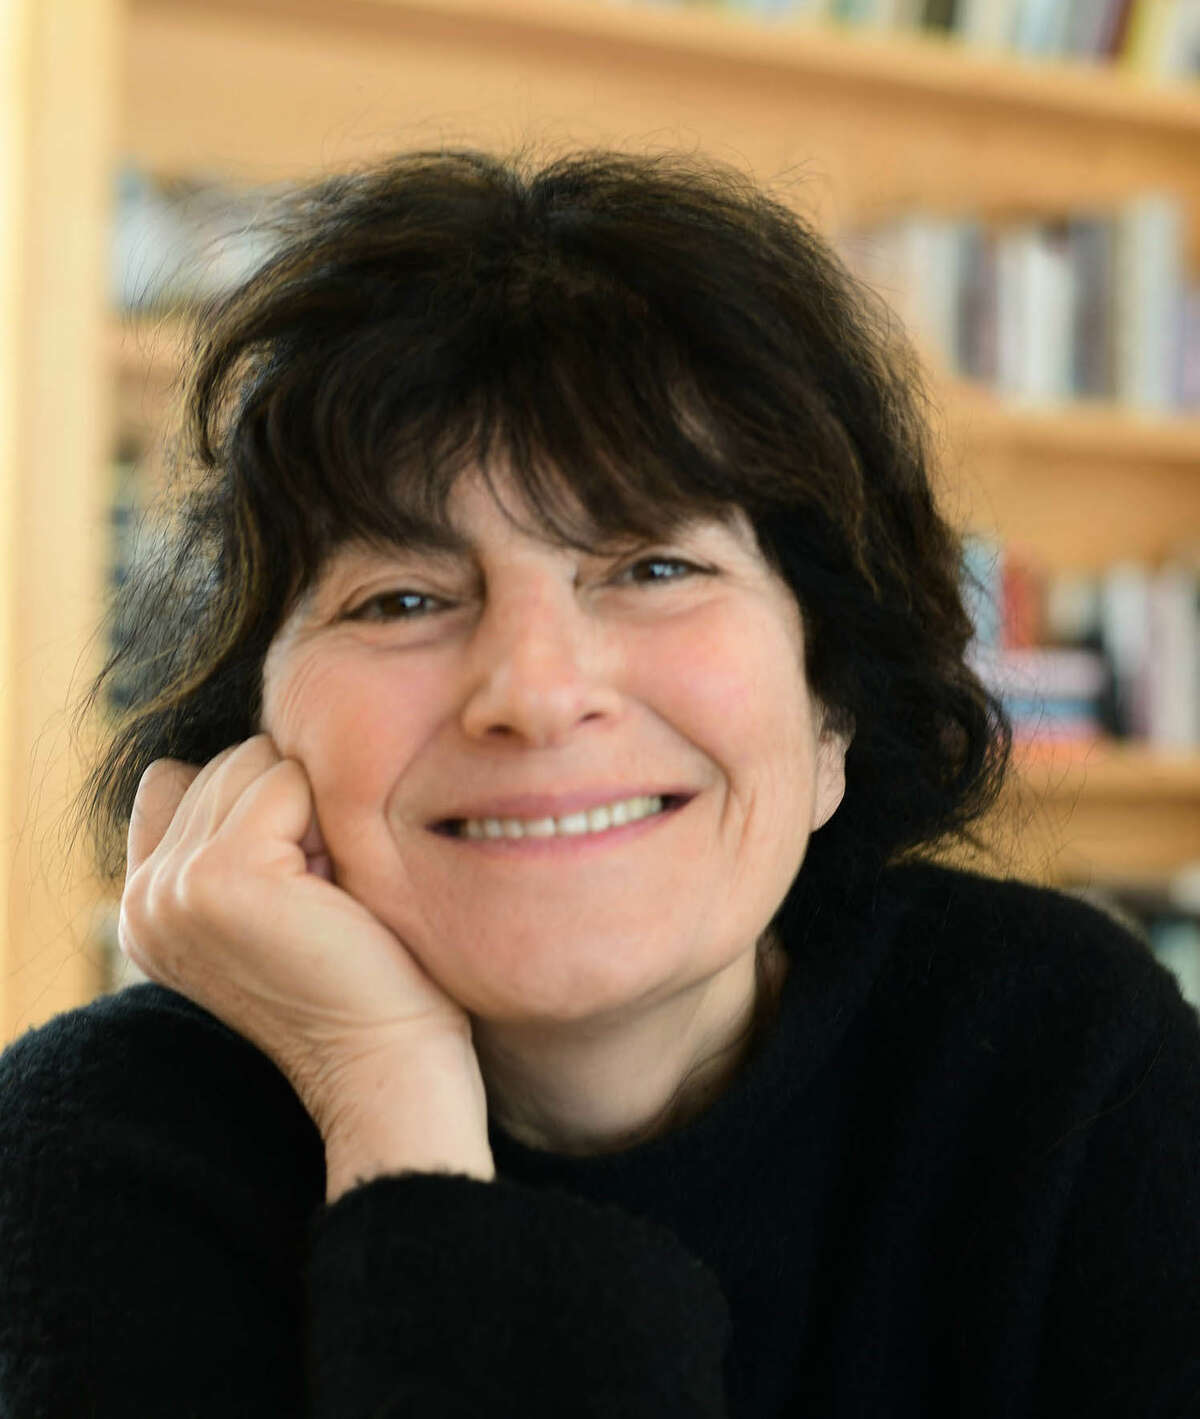 Best-selling food writer and Columbia County resident Ruth Reichl will appear Oct. 5, 2021, at the University at Albany as part of the Creative Life series of the New York State Writers Institure.